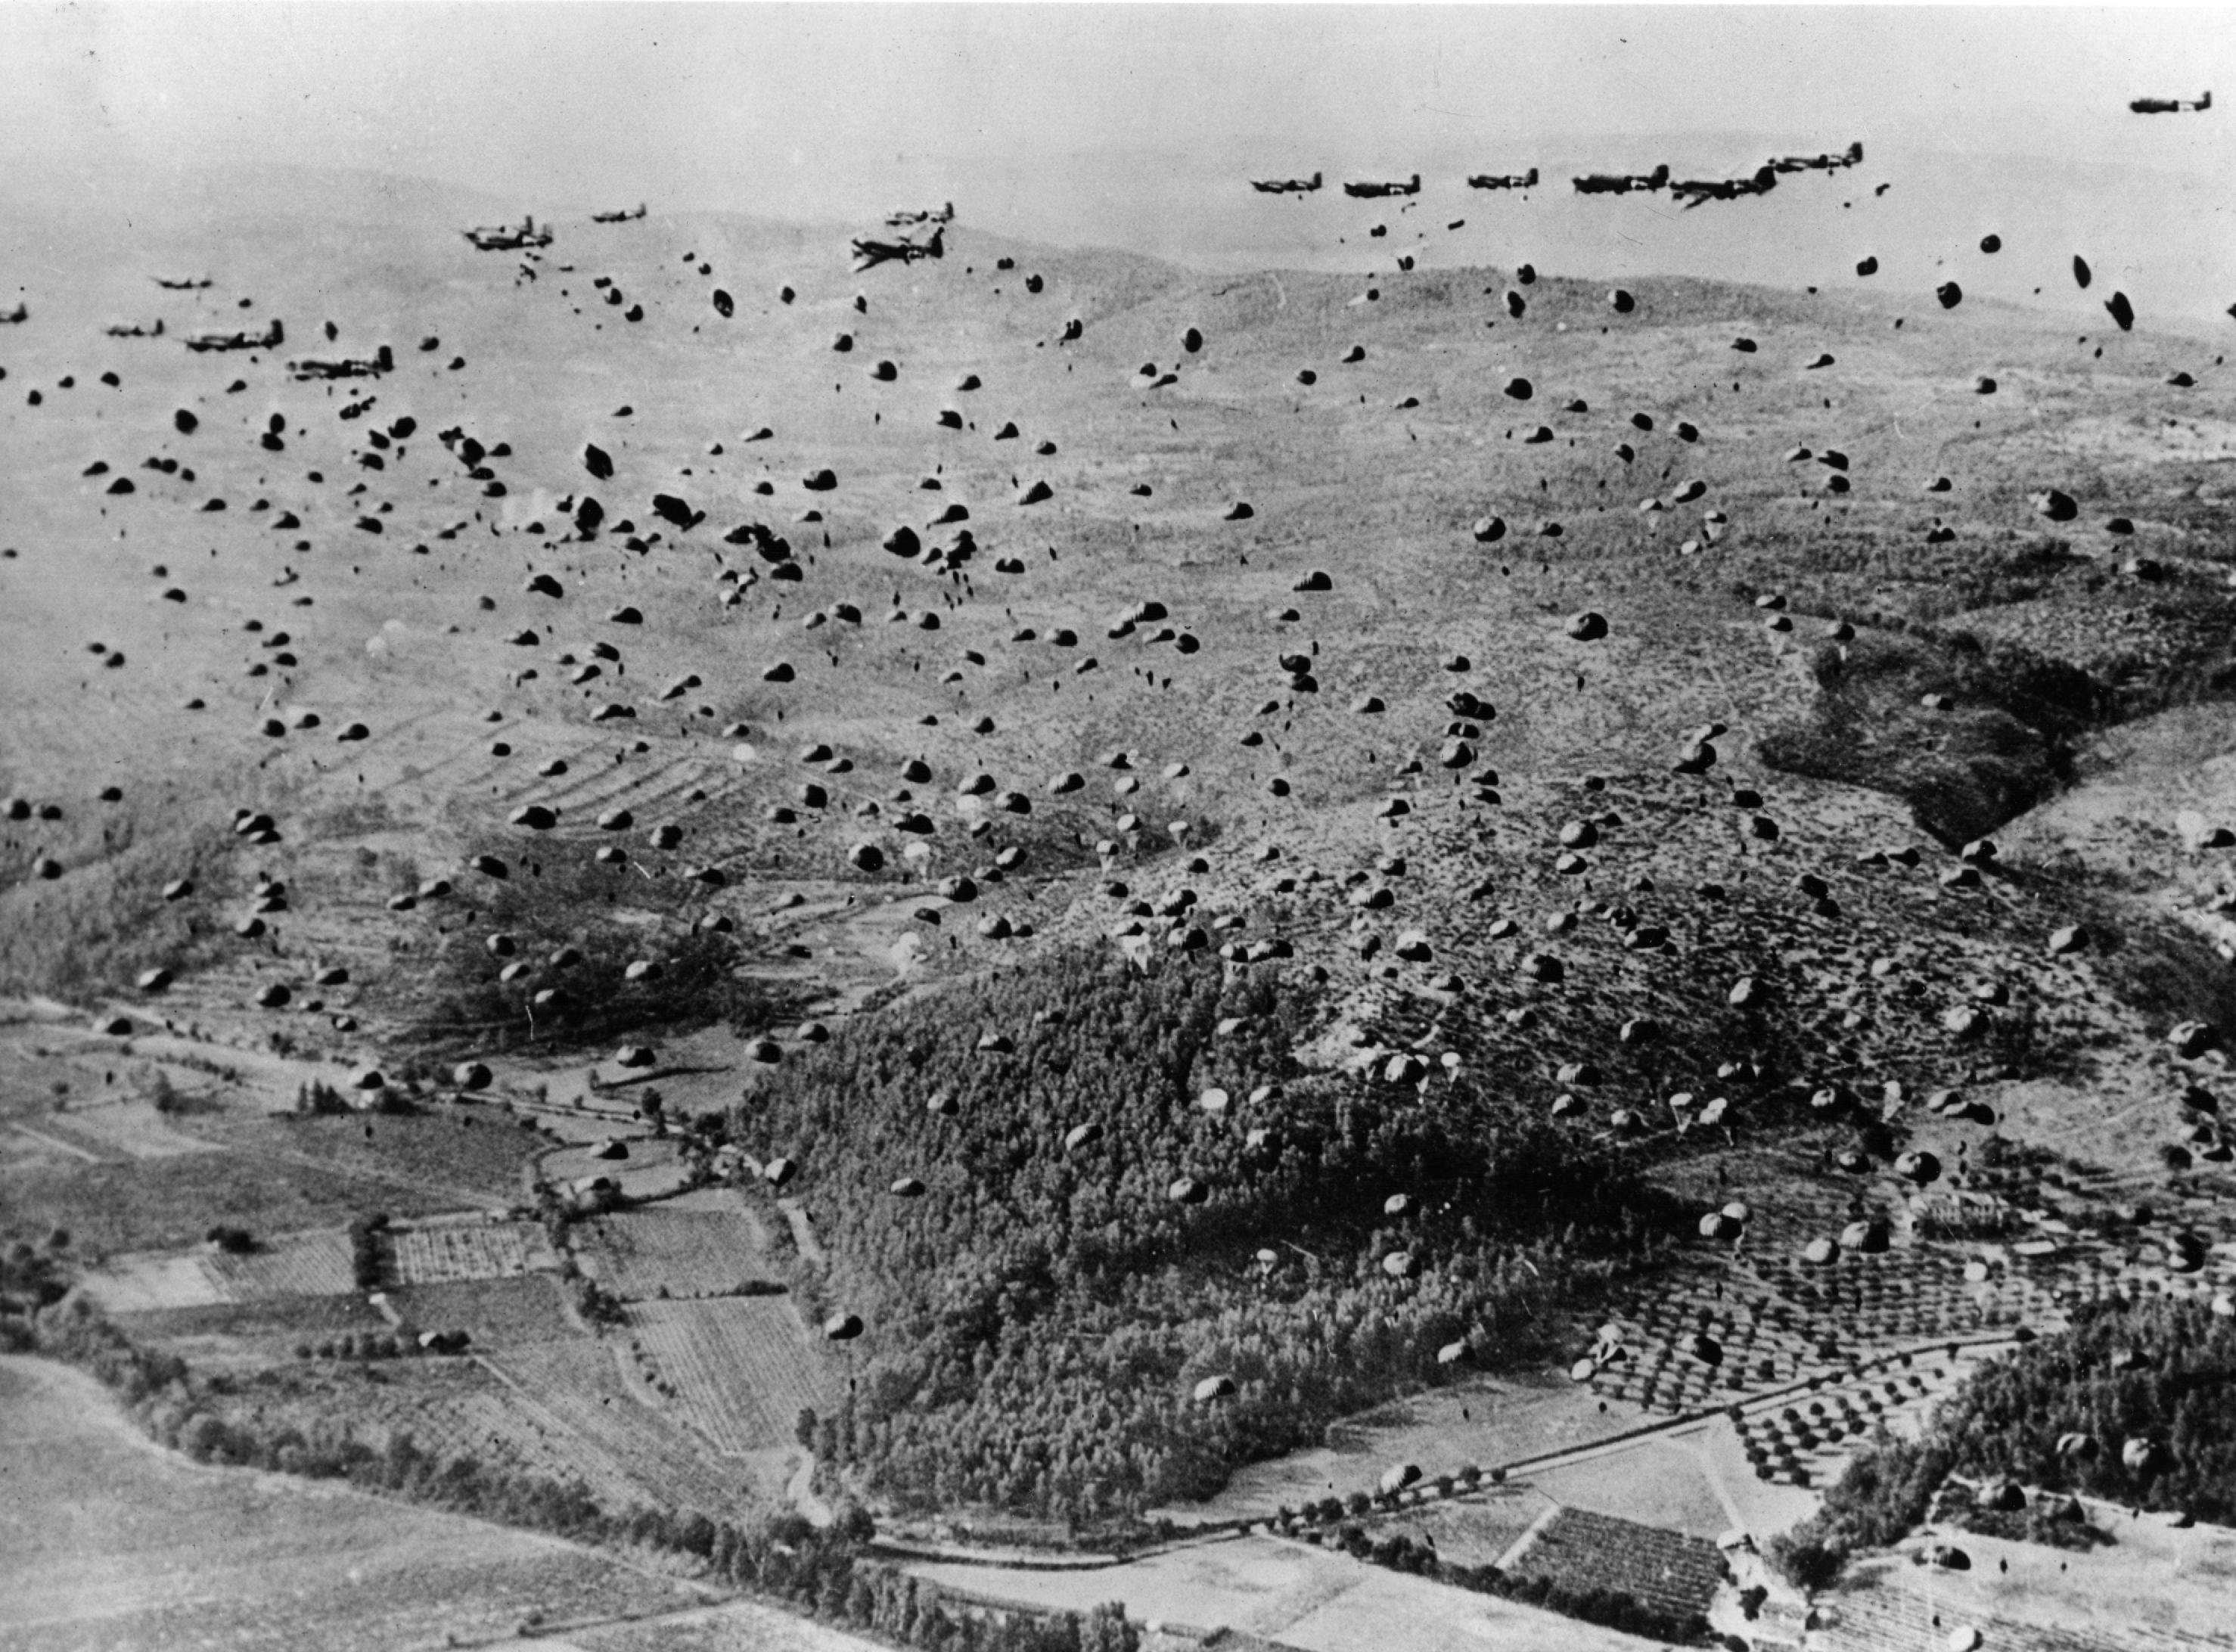 Parachutes fill the sky over the beachhead between Marseilles and Nice, during the Allied Invasion of France.